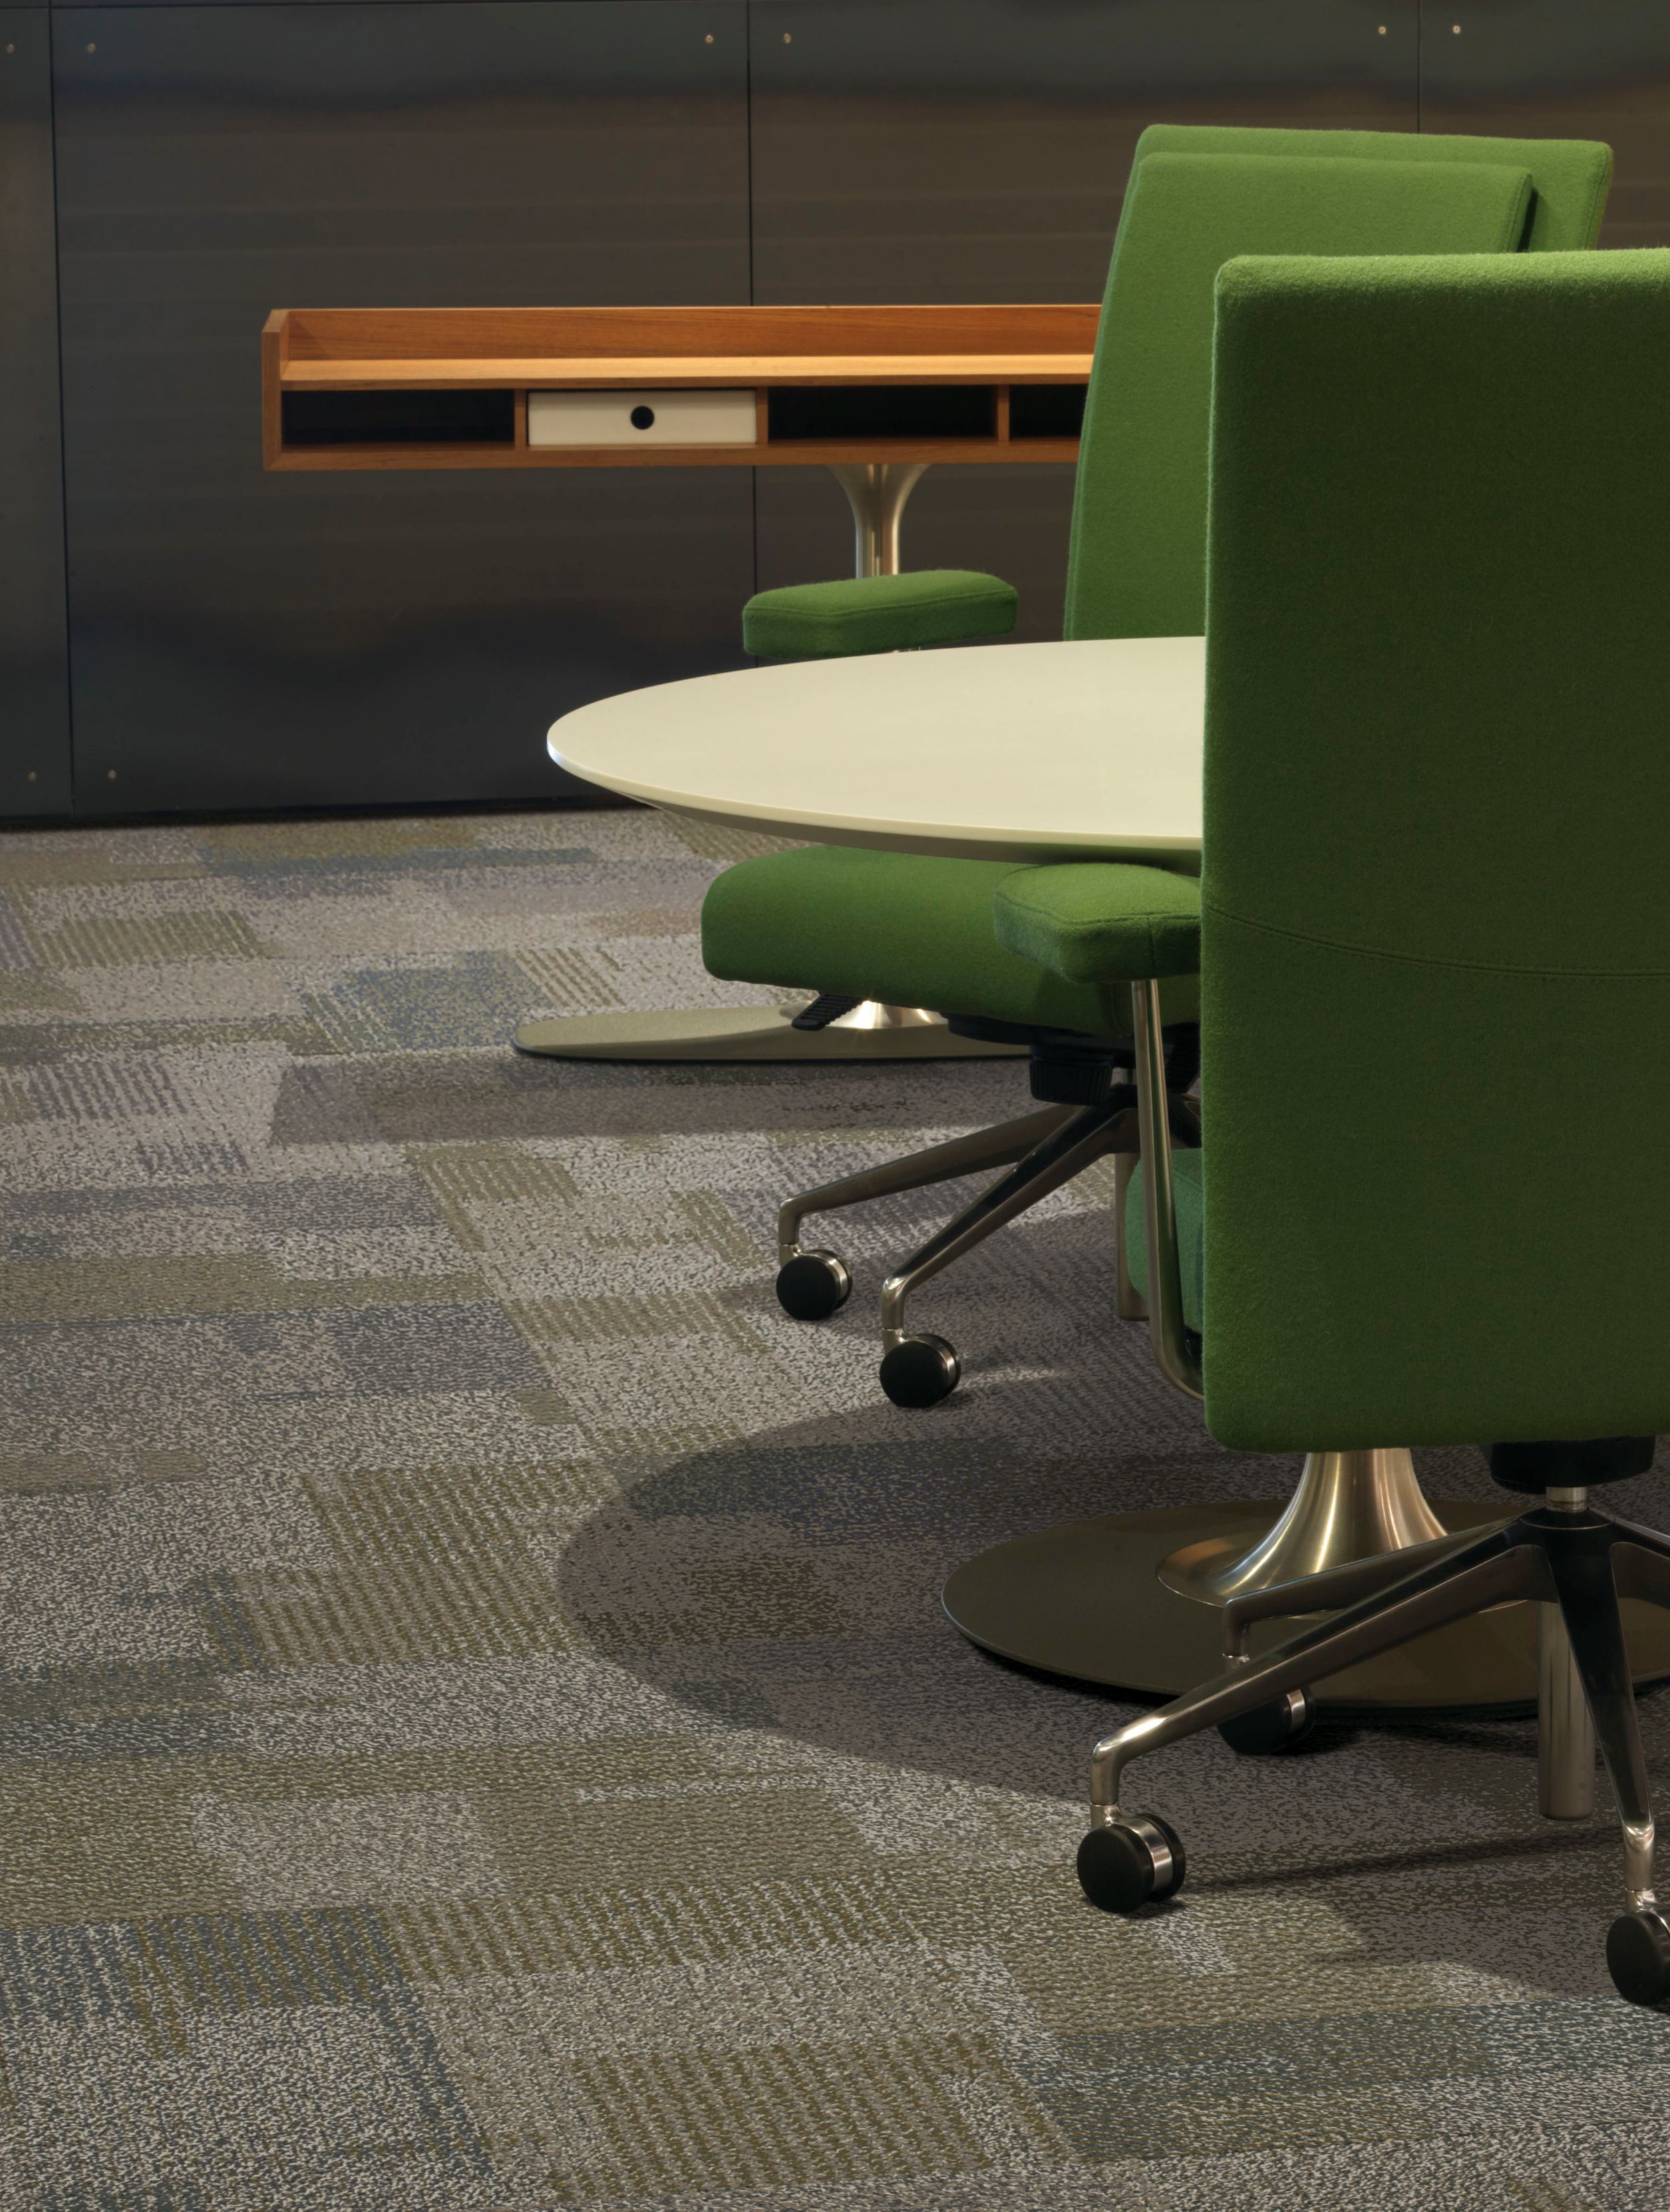 Interface Entropy carpet tile in room with green chairs and wooden shelf in background image number 6